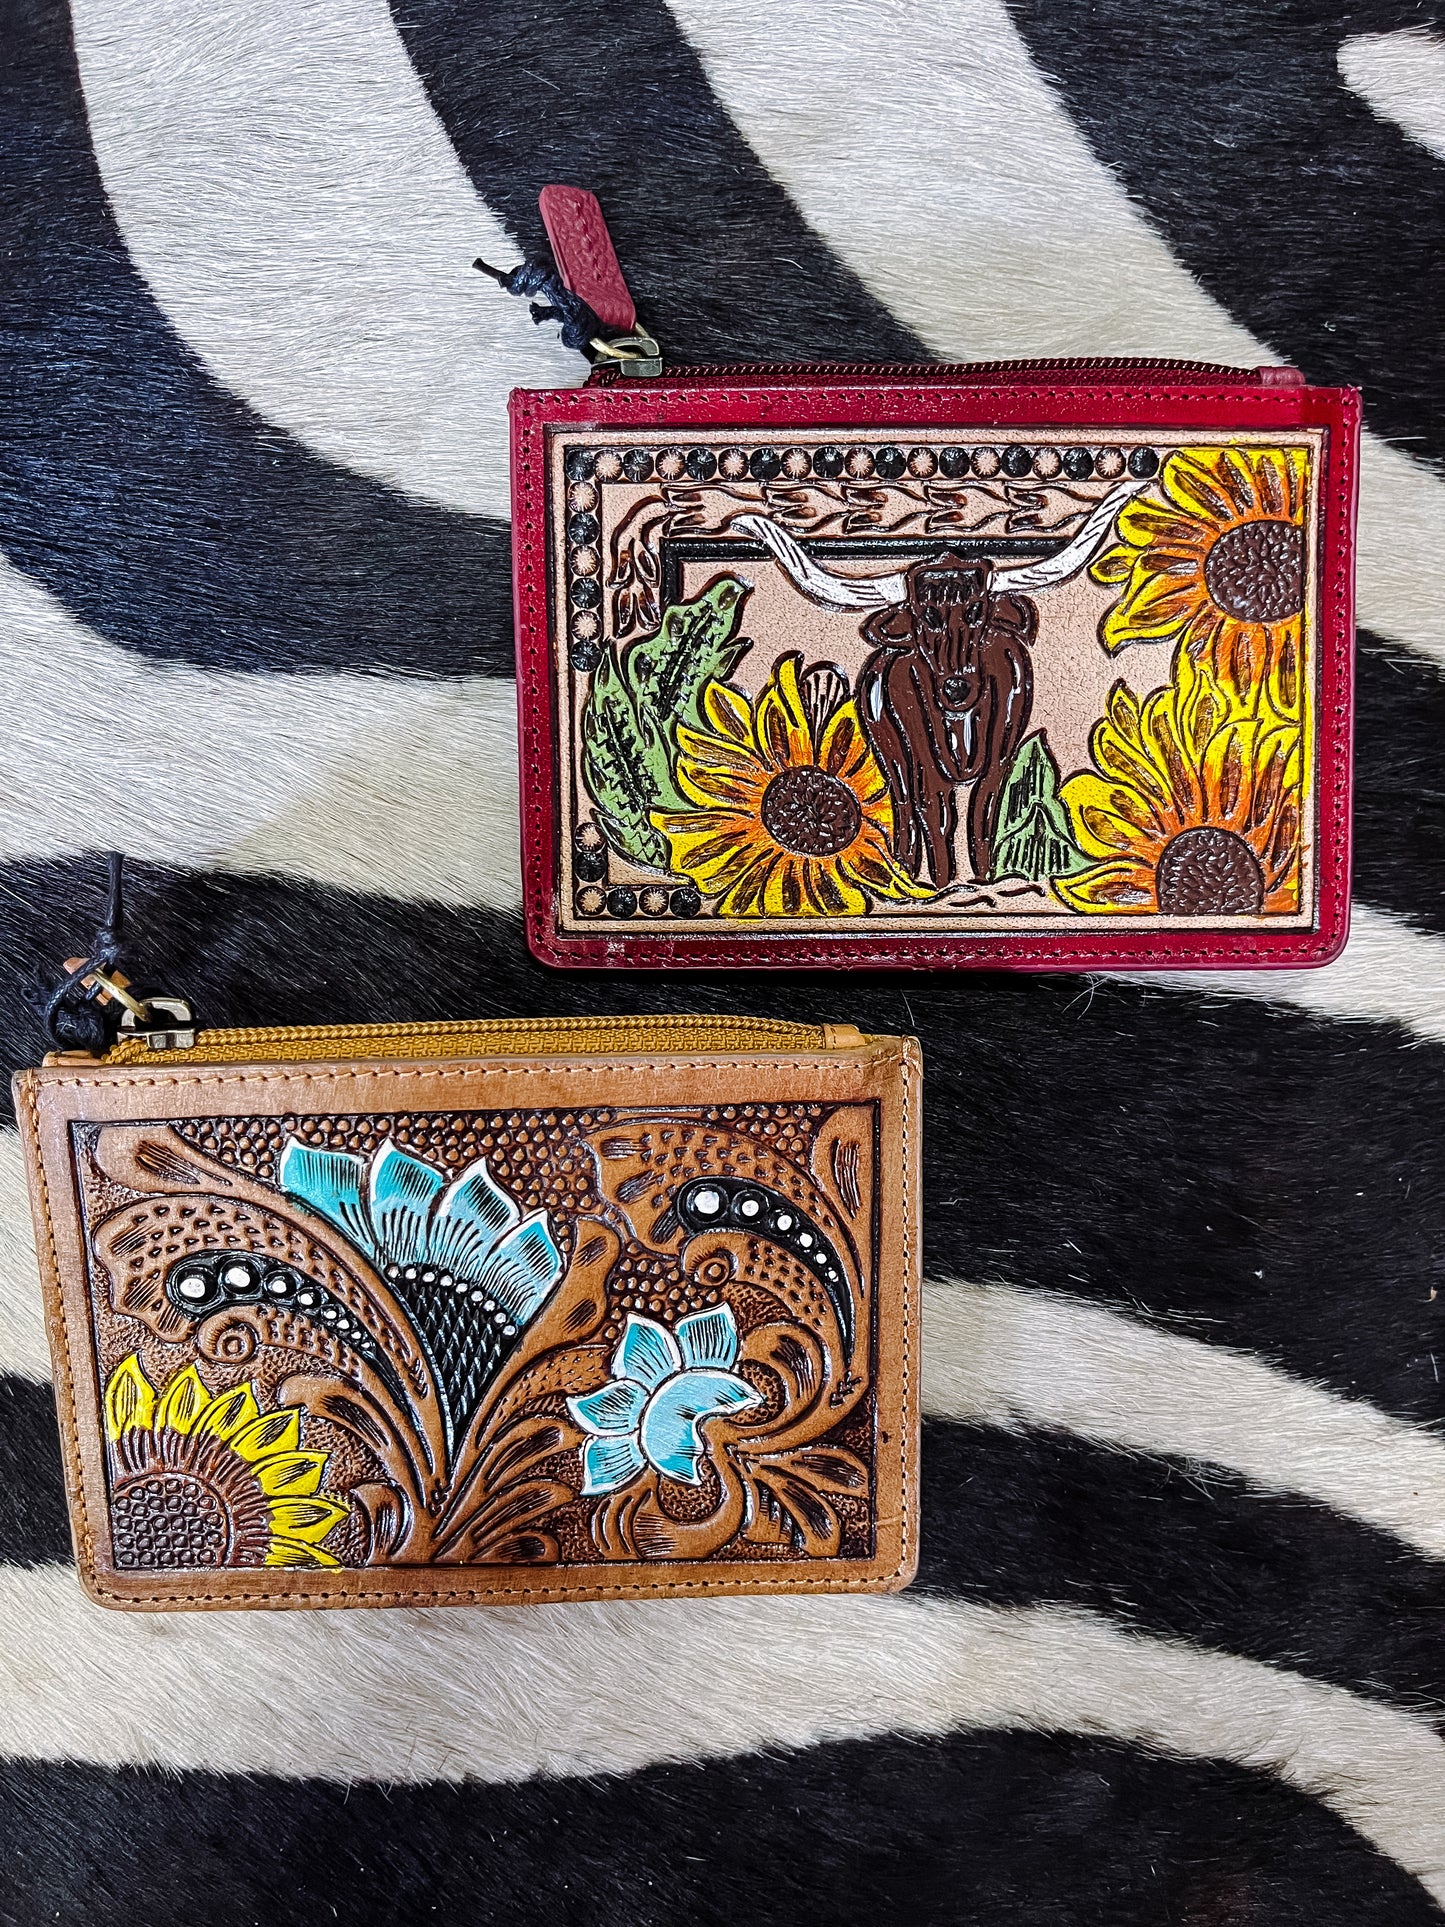 The Tooled Card Wallets